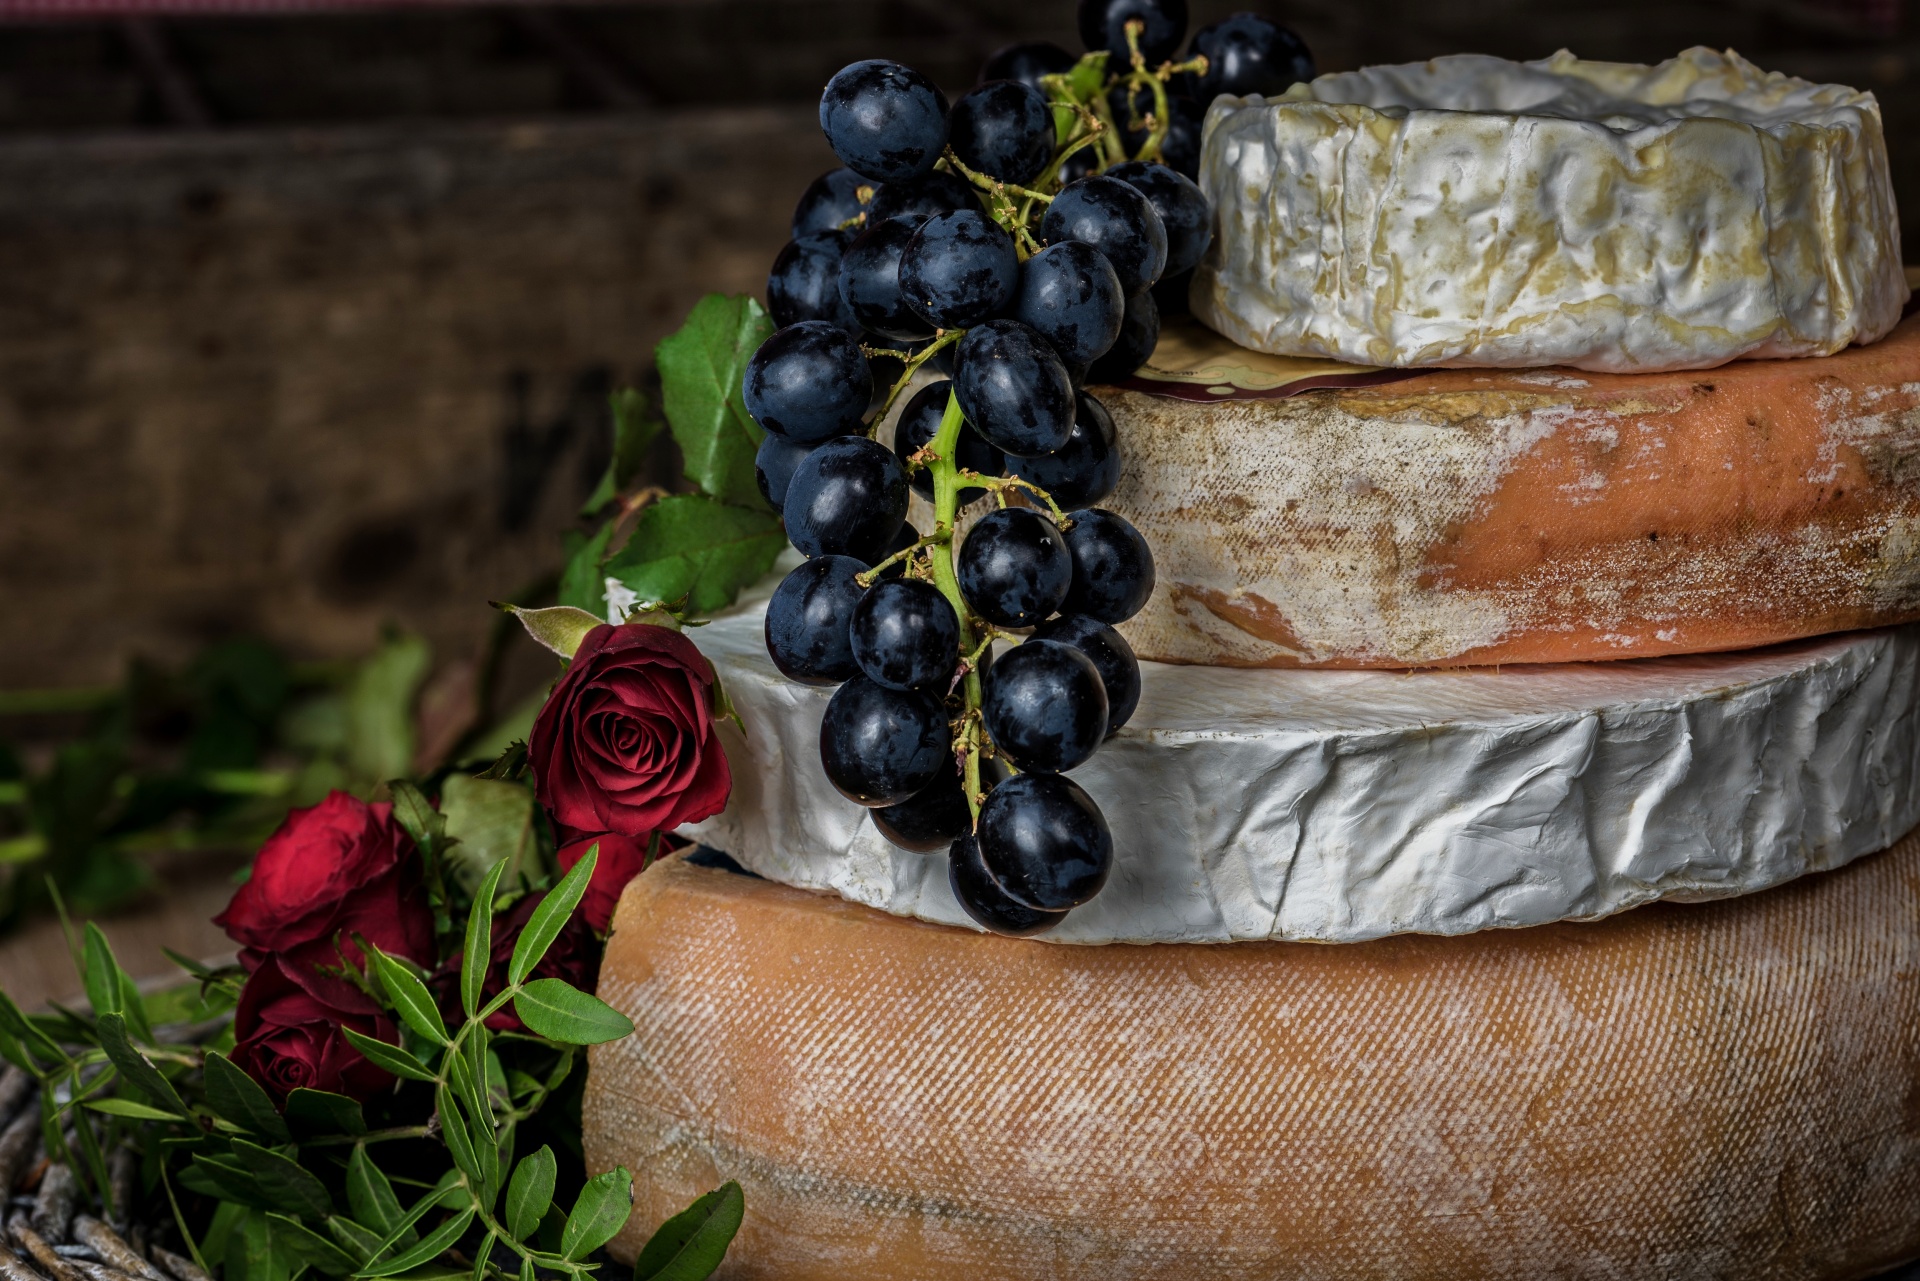 Colorful Image of Cheese, Grapes and Flowers